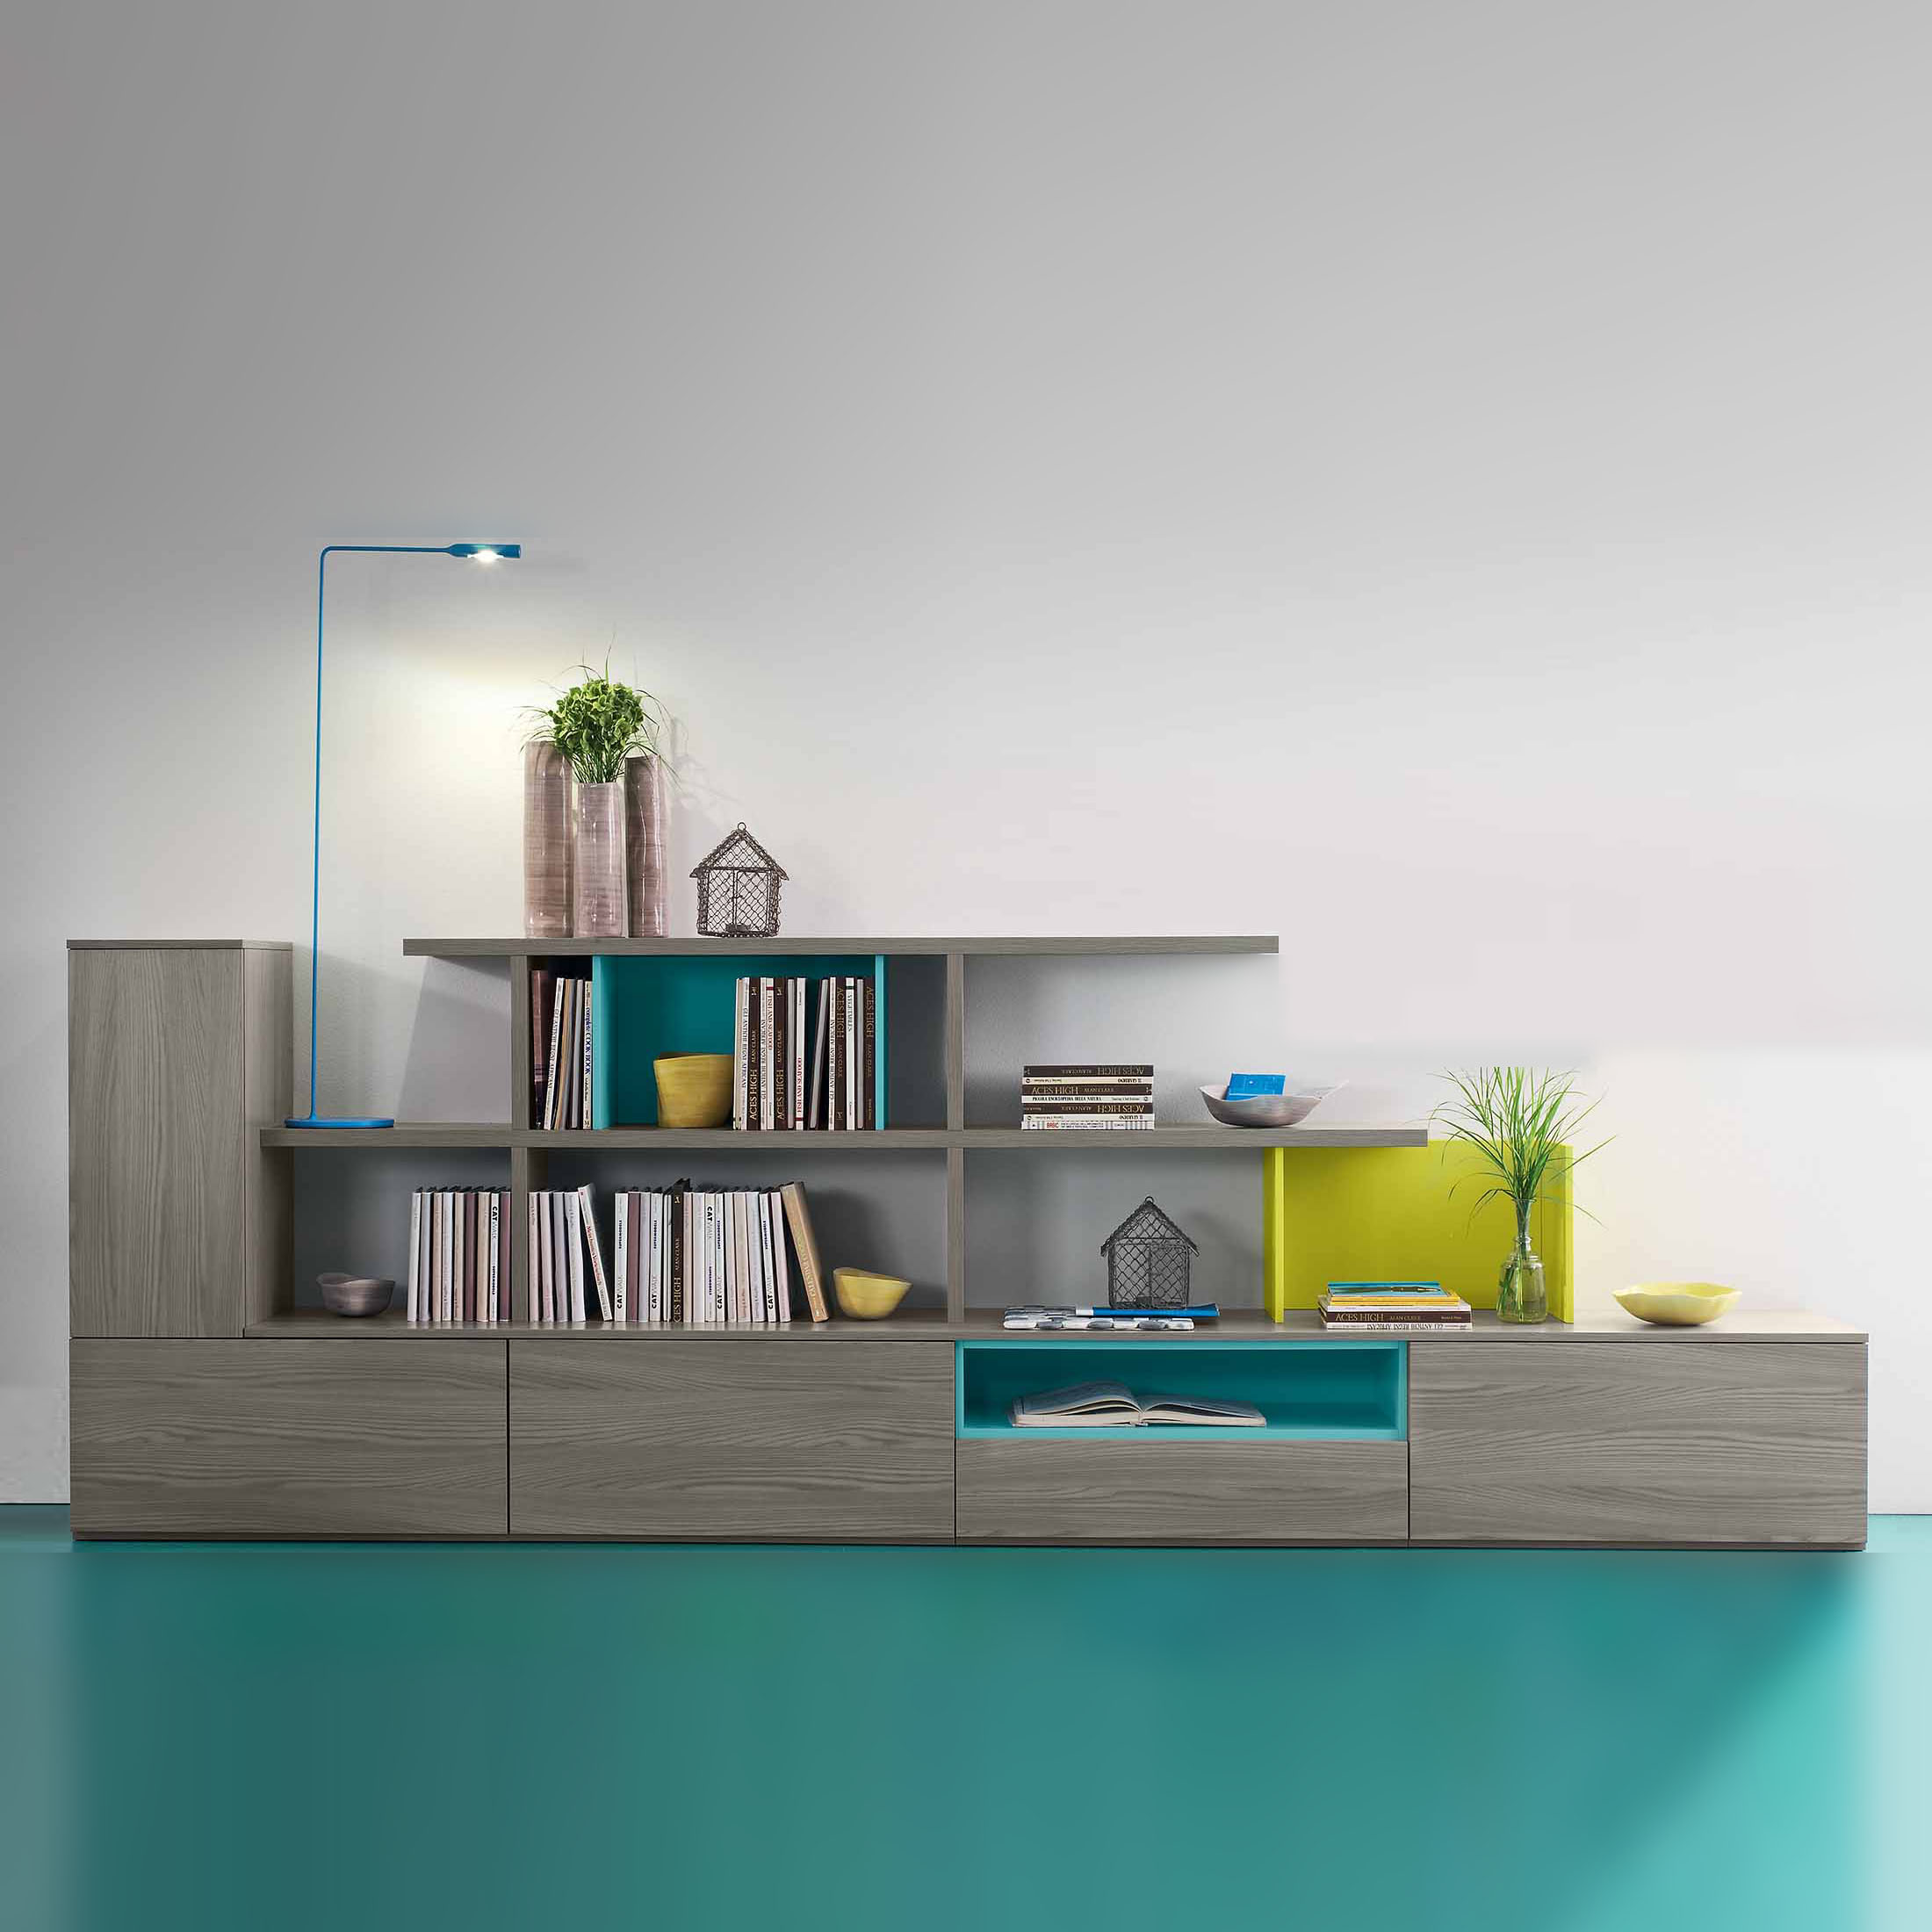 italian-contemporary-furniture-loto-flowers-free-standing-tv-unit-media-stand-lounge-living-room-by-mobilstella.jpg